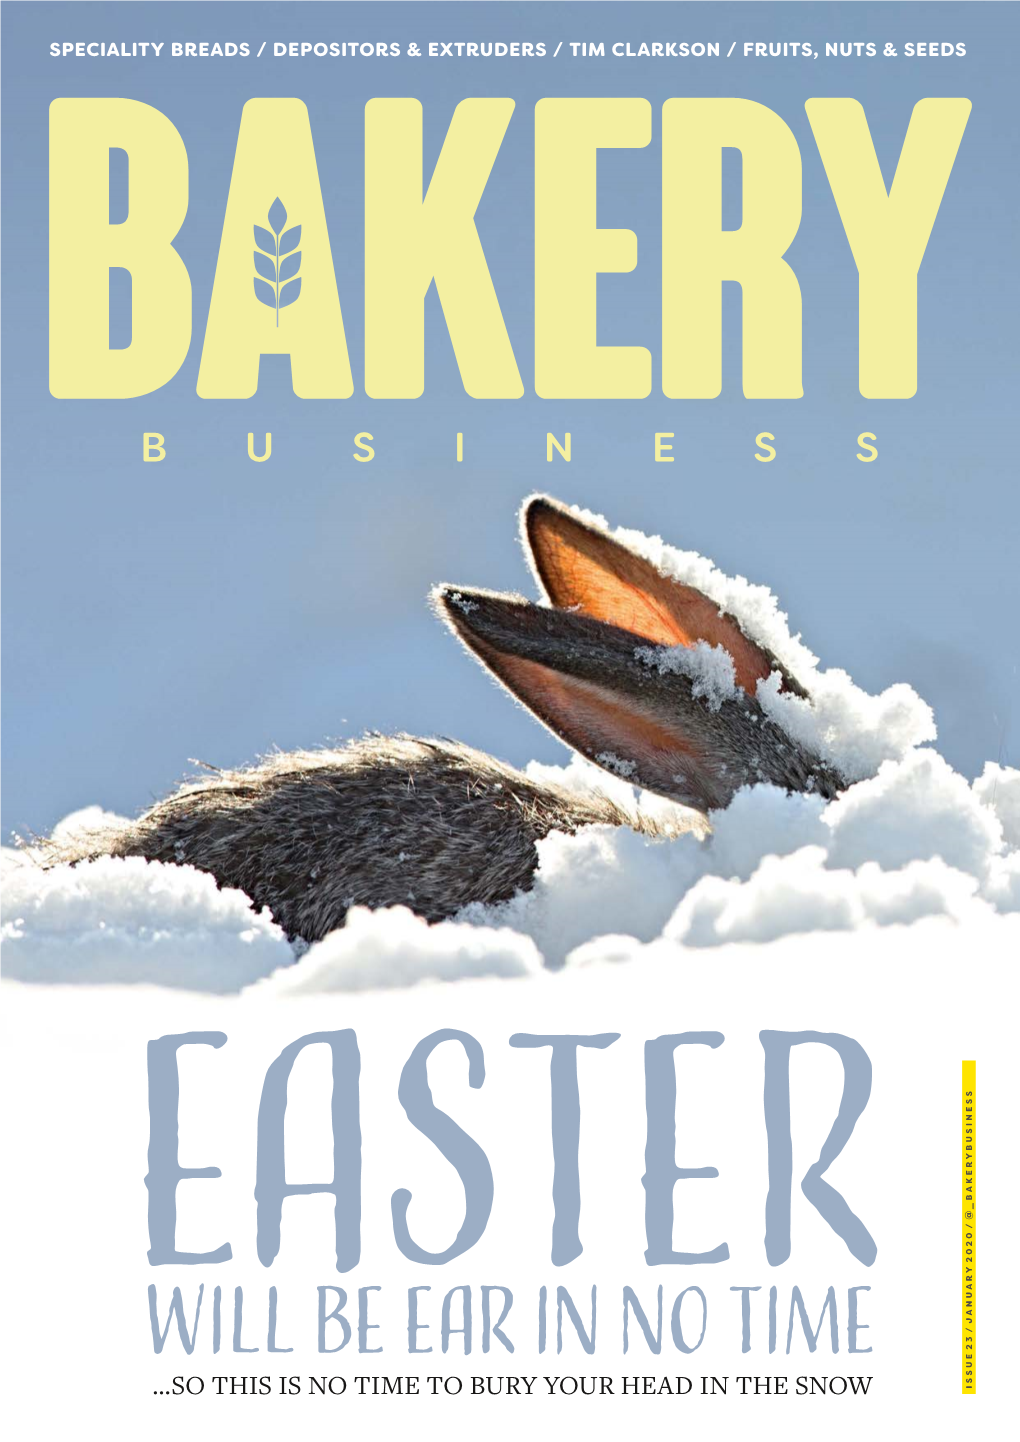 Speciality Breads / Depositors & Extruders / Tim Clarkson / Fruits, Nuts & Seeds Bakery Business /January 2020 /January Business Bakery